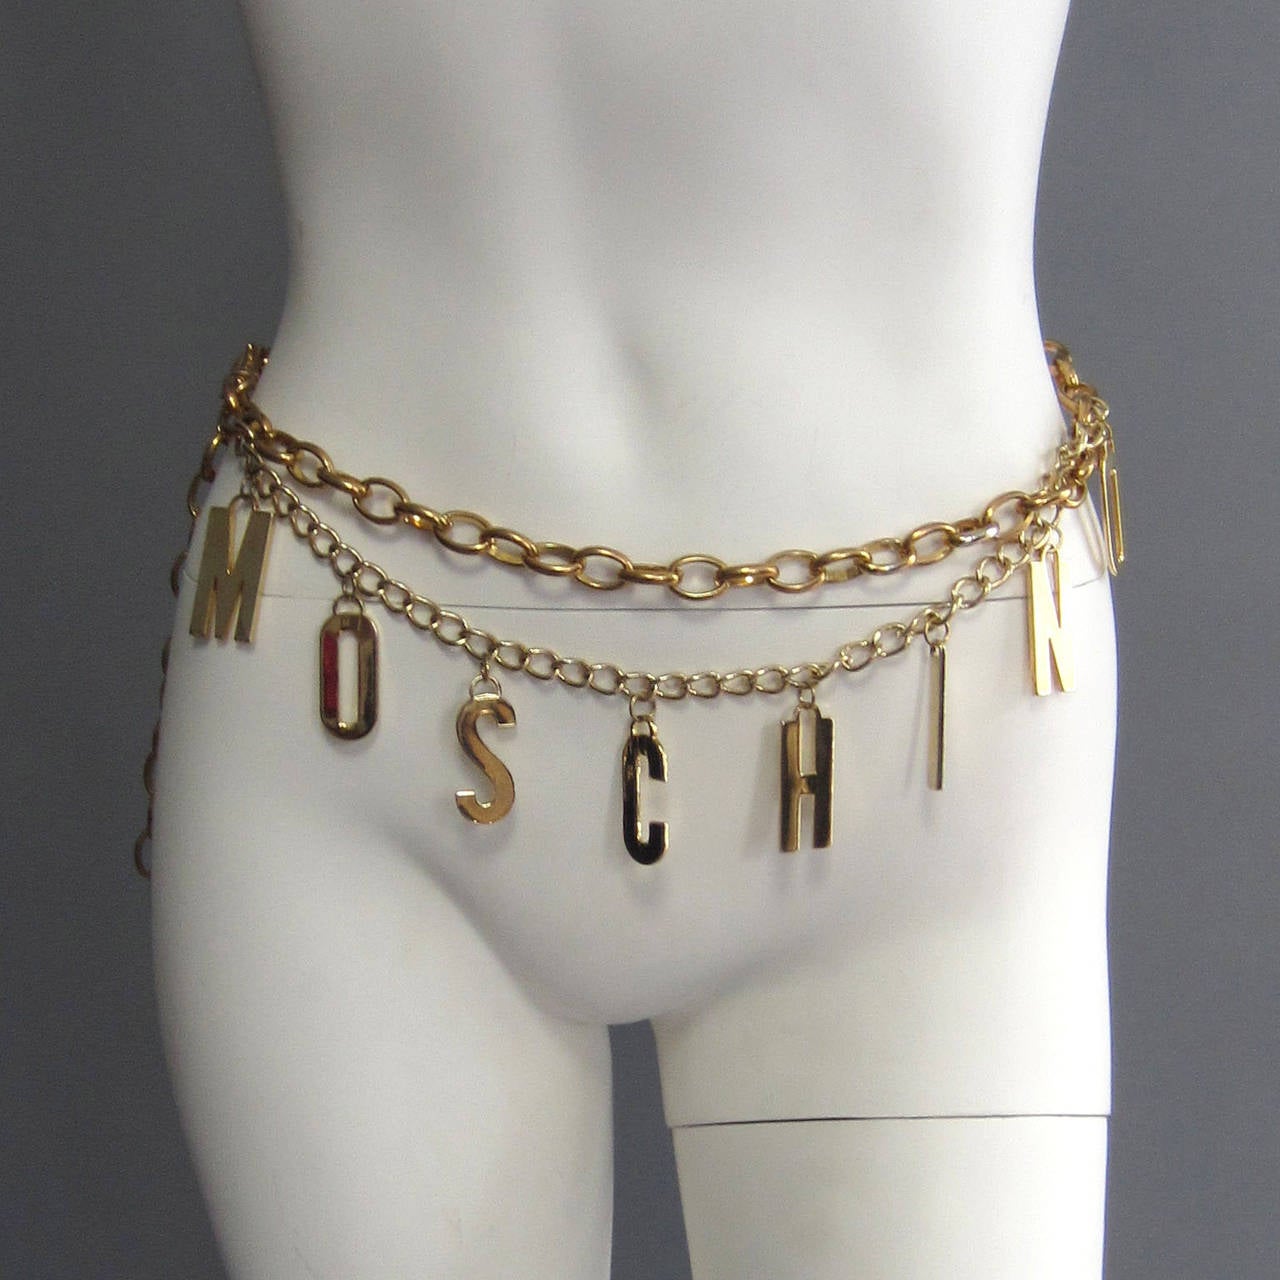 M O S C H I N O  spells MOSCHINO! This adjustable chain belt features these letters, each hanging from an small chain that swags below the main, thicker chain. With a hook closure, this belt can be adjusted to a wide range of sizes by simply